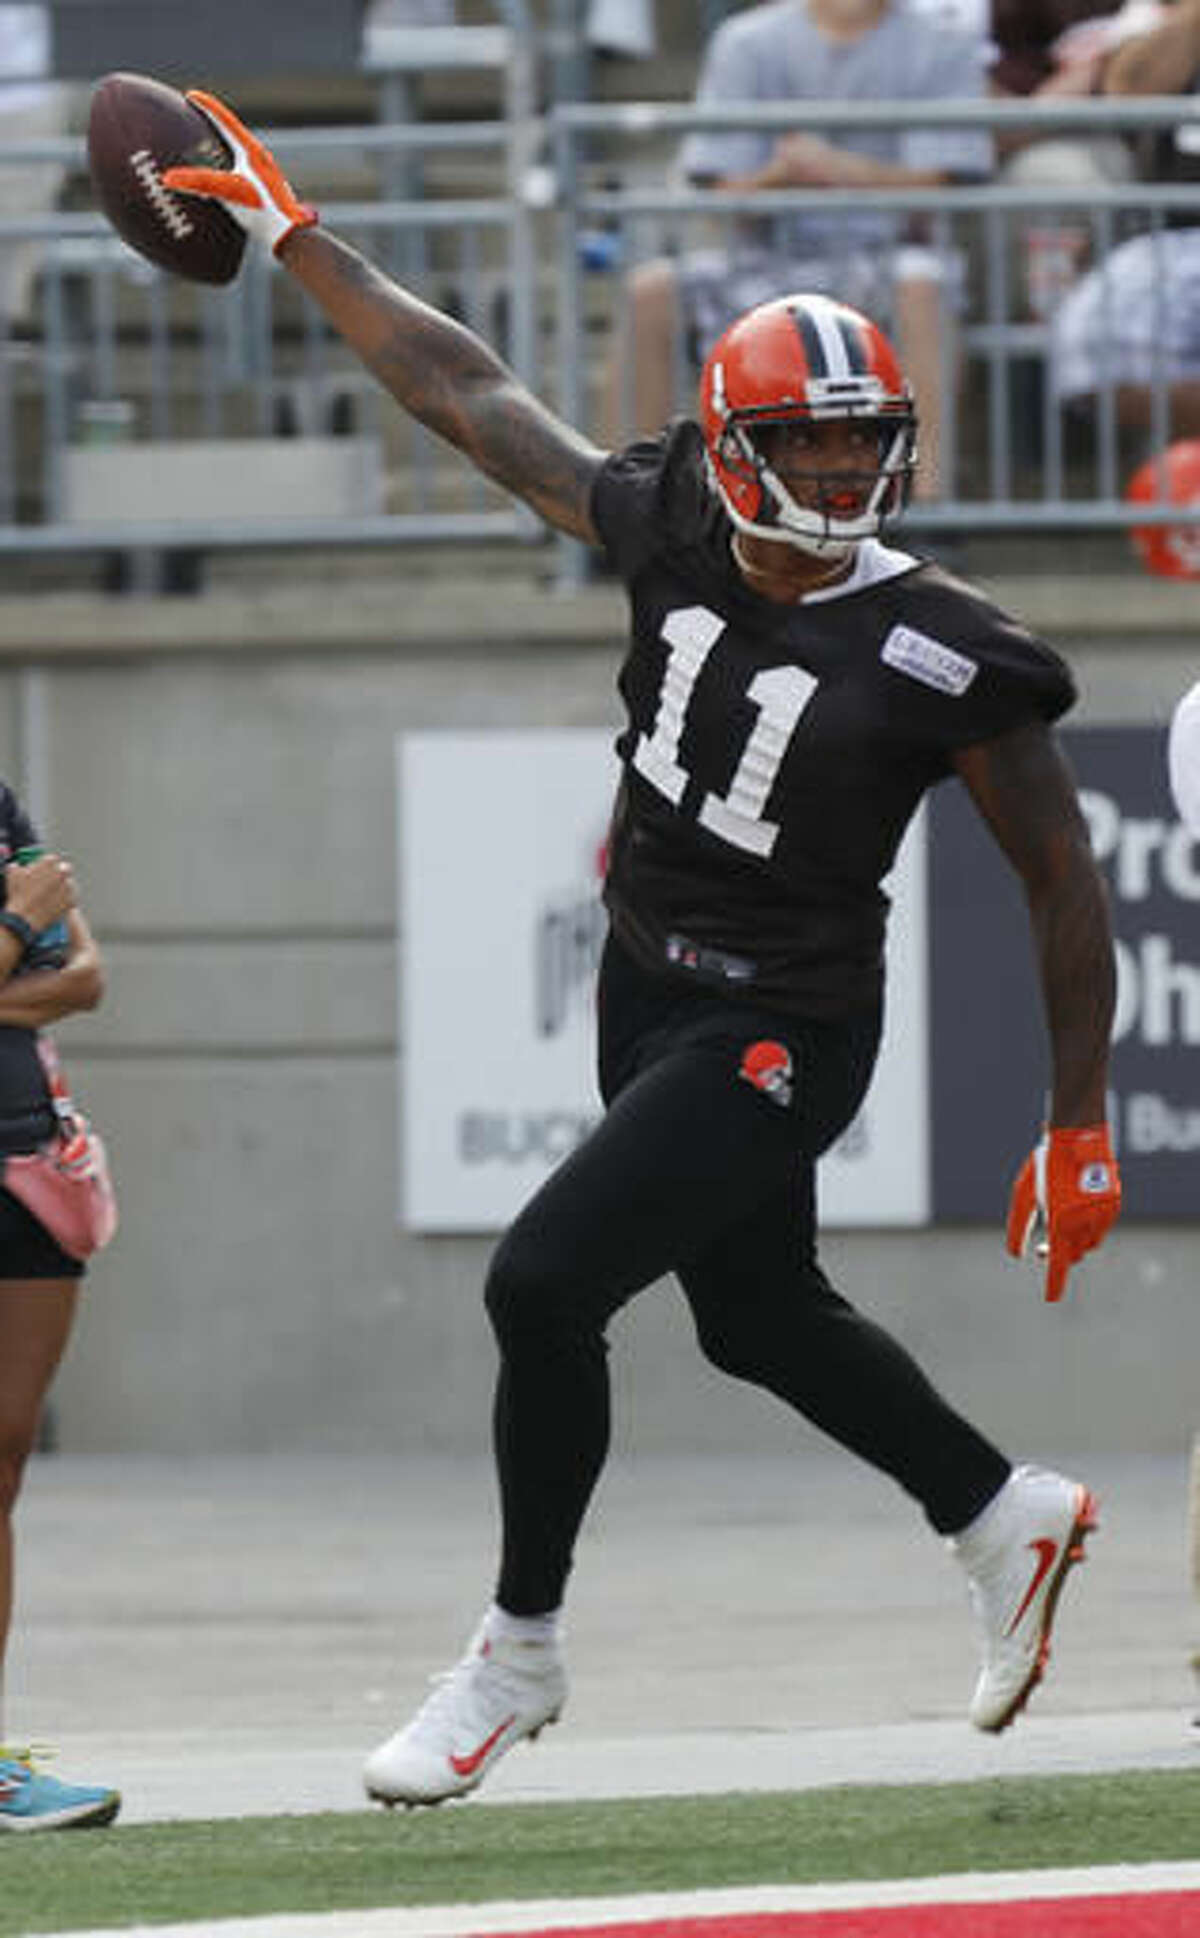 Cleveland Browns wide receiver Terrelle Pryor celebrates scoring a touchdown during their orange and brown scrimmage at the NFL football team's training camp Saturday, Aug. 6, 2016, in Columbus, Ohio. (AP Photo/Jay LaPrete)